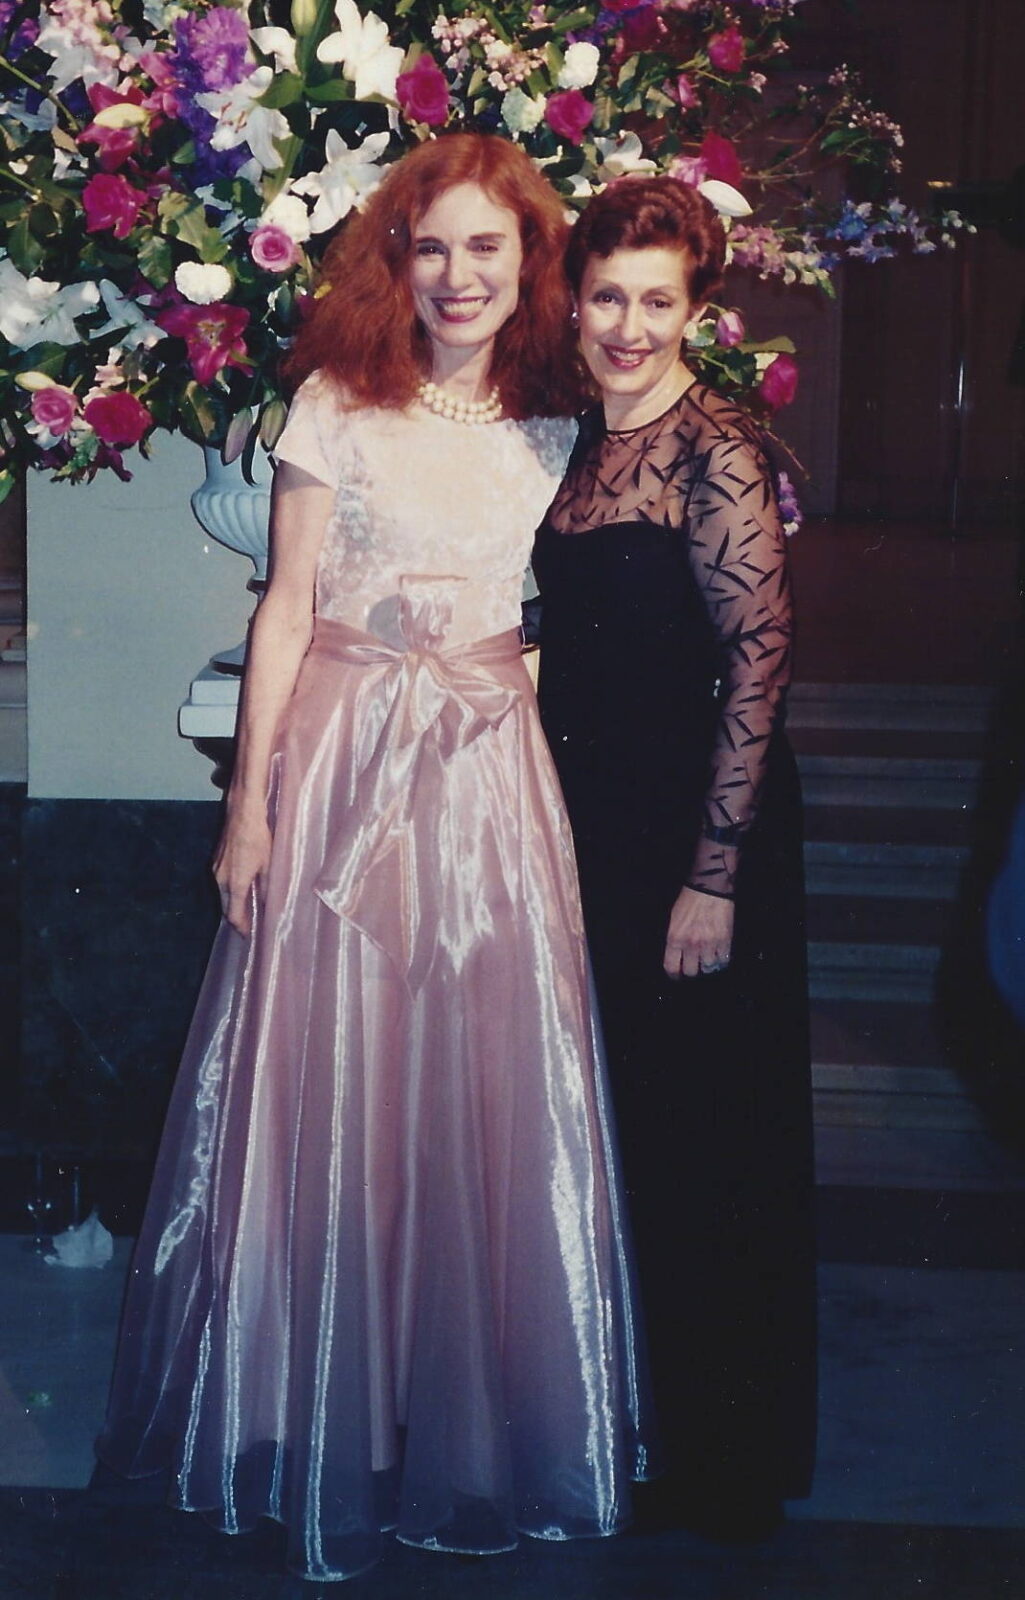 Felicia Milewicz with her friend Evelyn Lauder.